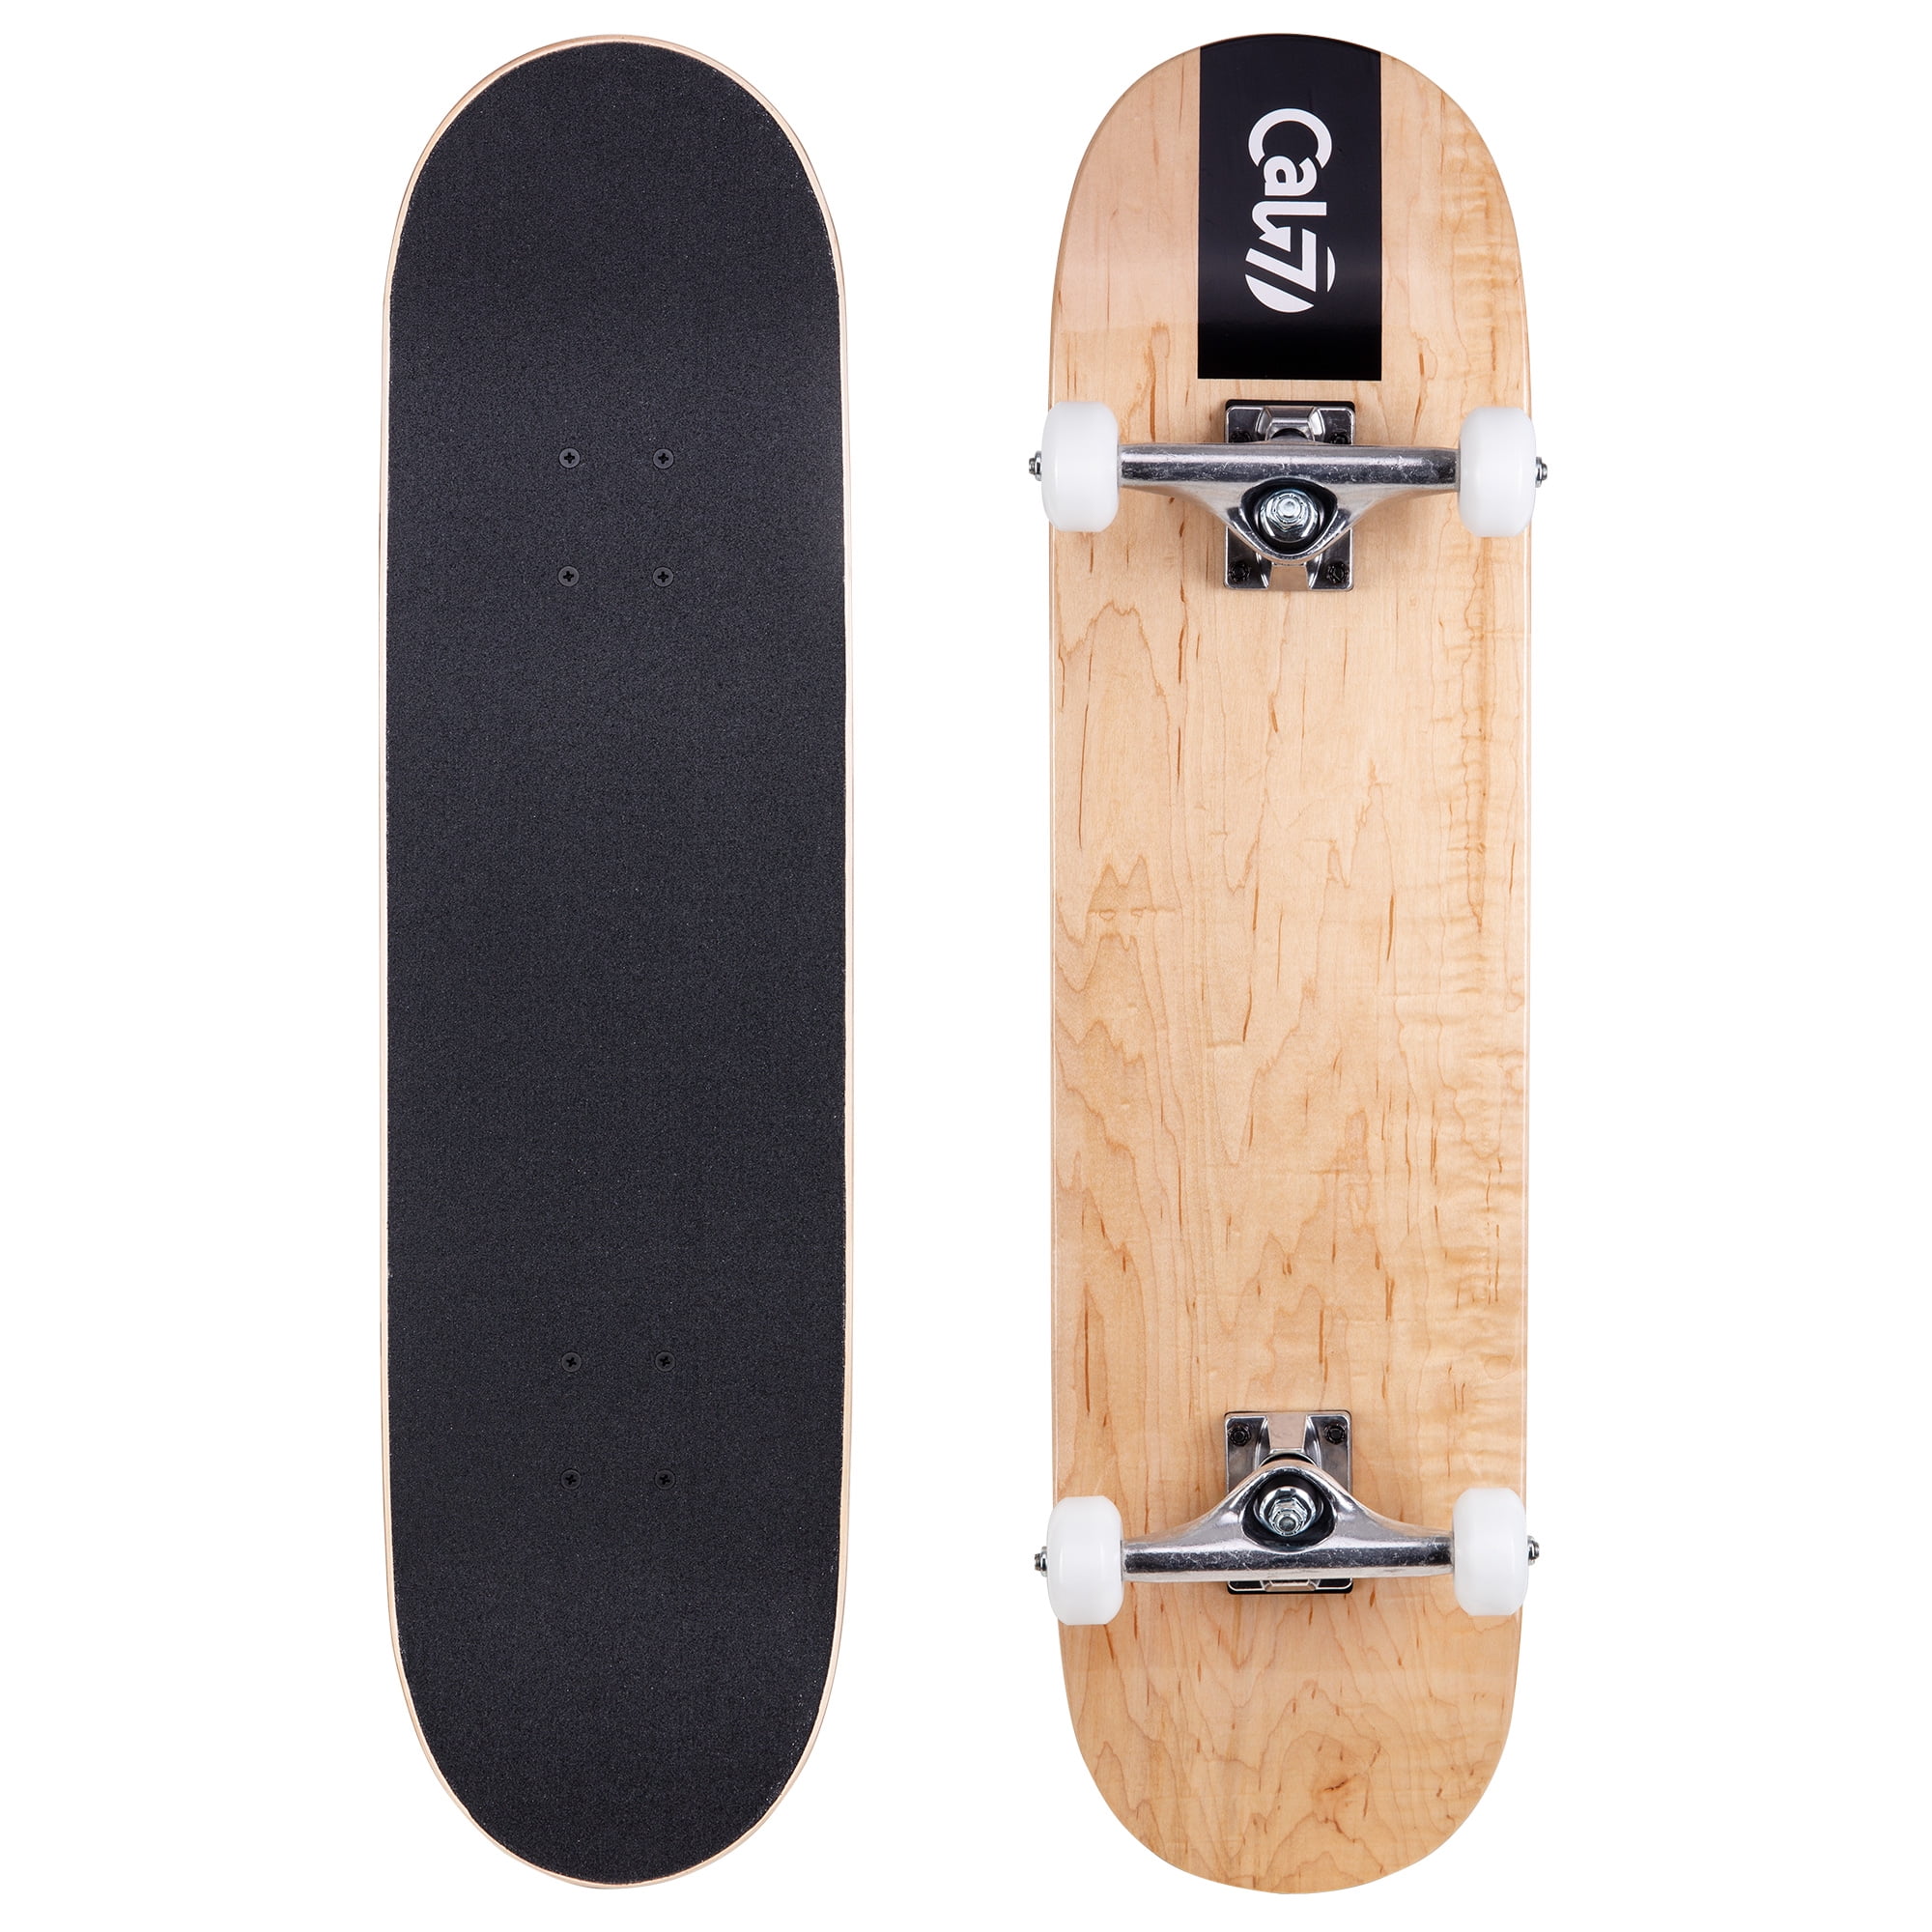 Cal 7 Fossil 8" Complete Skateboards (Obsidian)